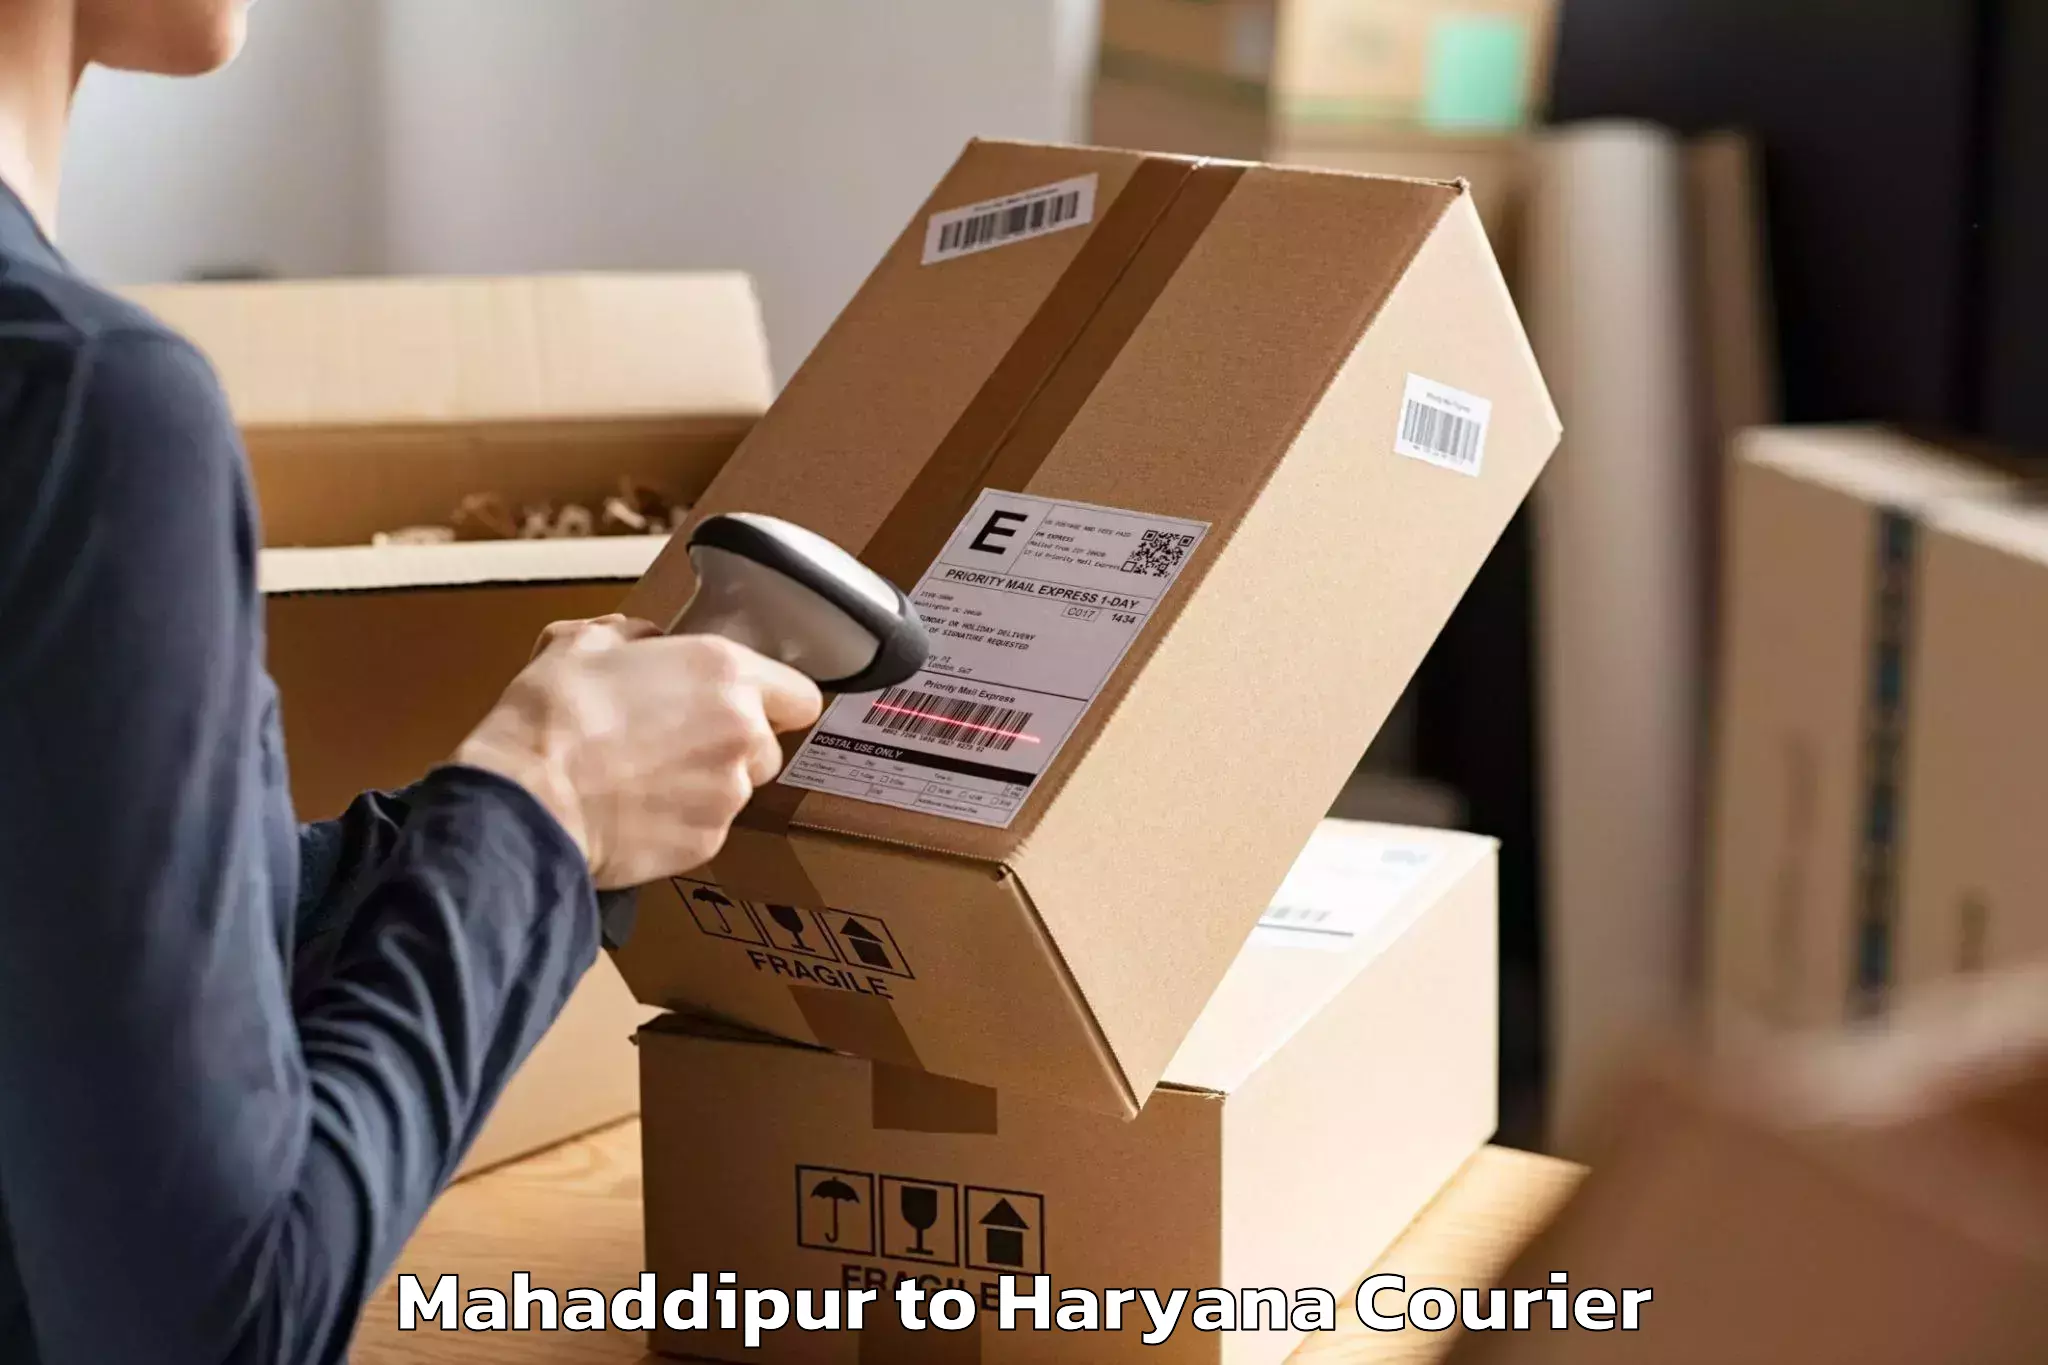 Furniture moving specialists Mahaddipur to Assandh